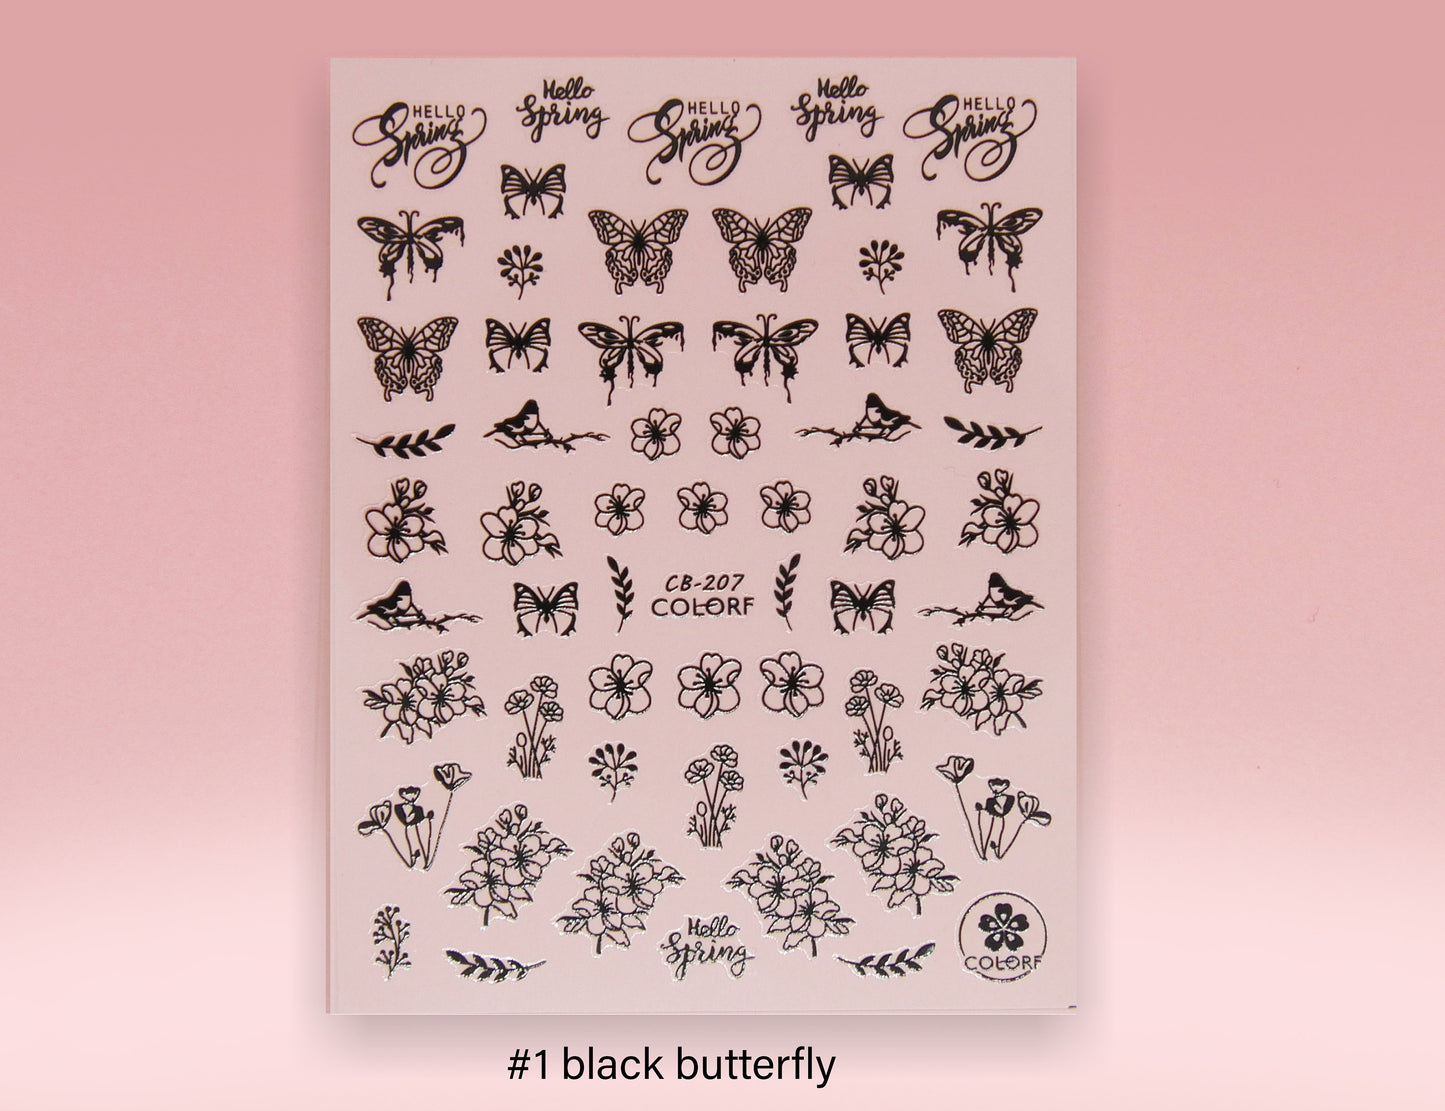 Butterflies floral nail sticker/ Fairy tale Unicorn Star Stickers Self Adhesive Decals/ Nail Art Supplies Nail Decos Peel Off Instagram Nail